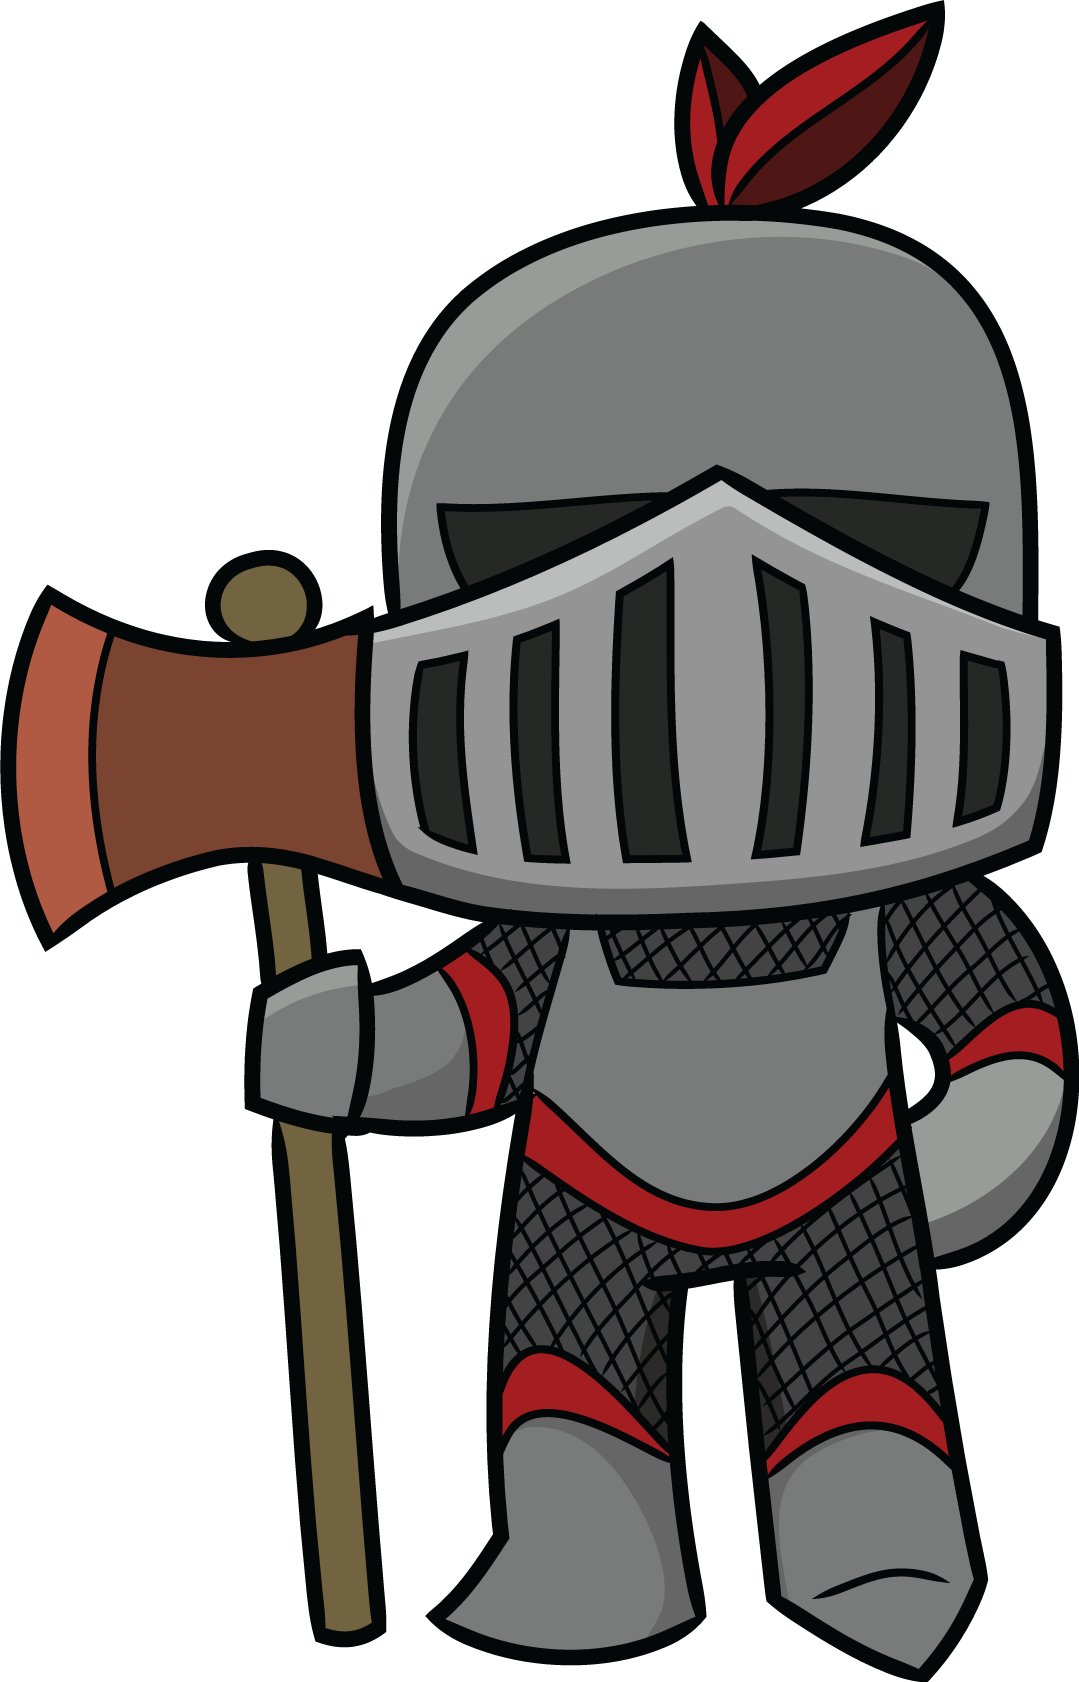 Medieval Knight Clipart - ClipArt Best